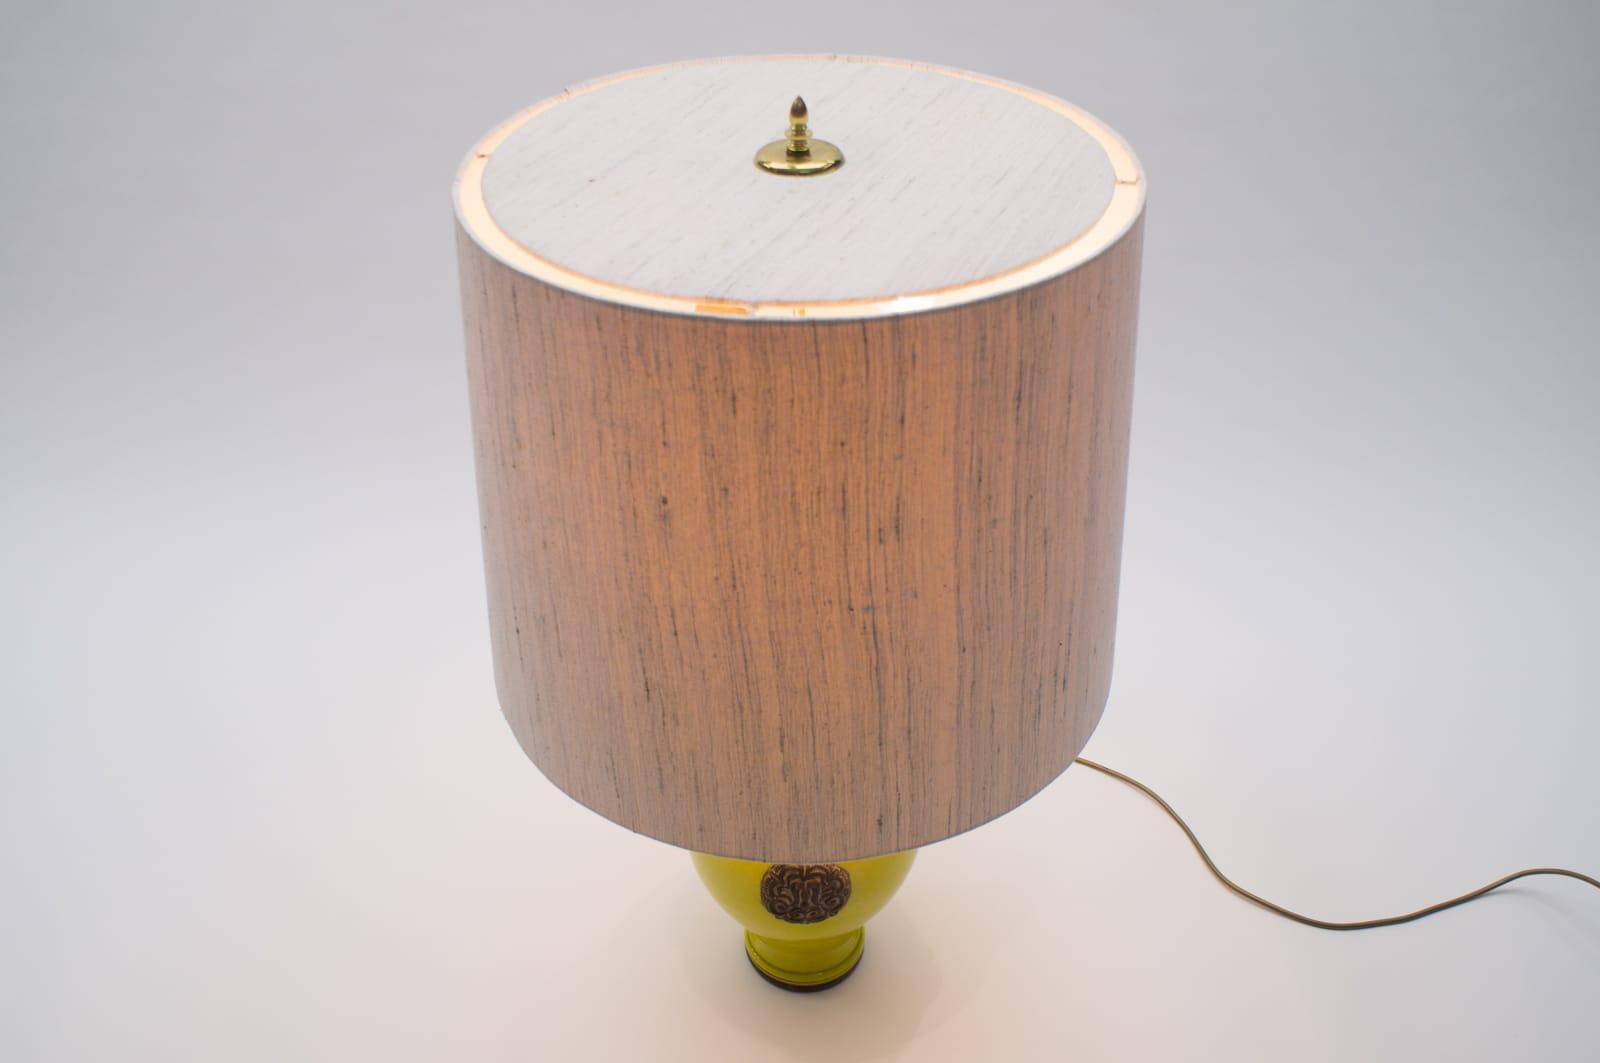 Mid-20th Century Oatmeal and Yellow Gilt Glazed Ceramic Table Lamp by Ugo Zaccagnini, Italy 1960s For Sale